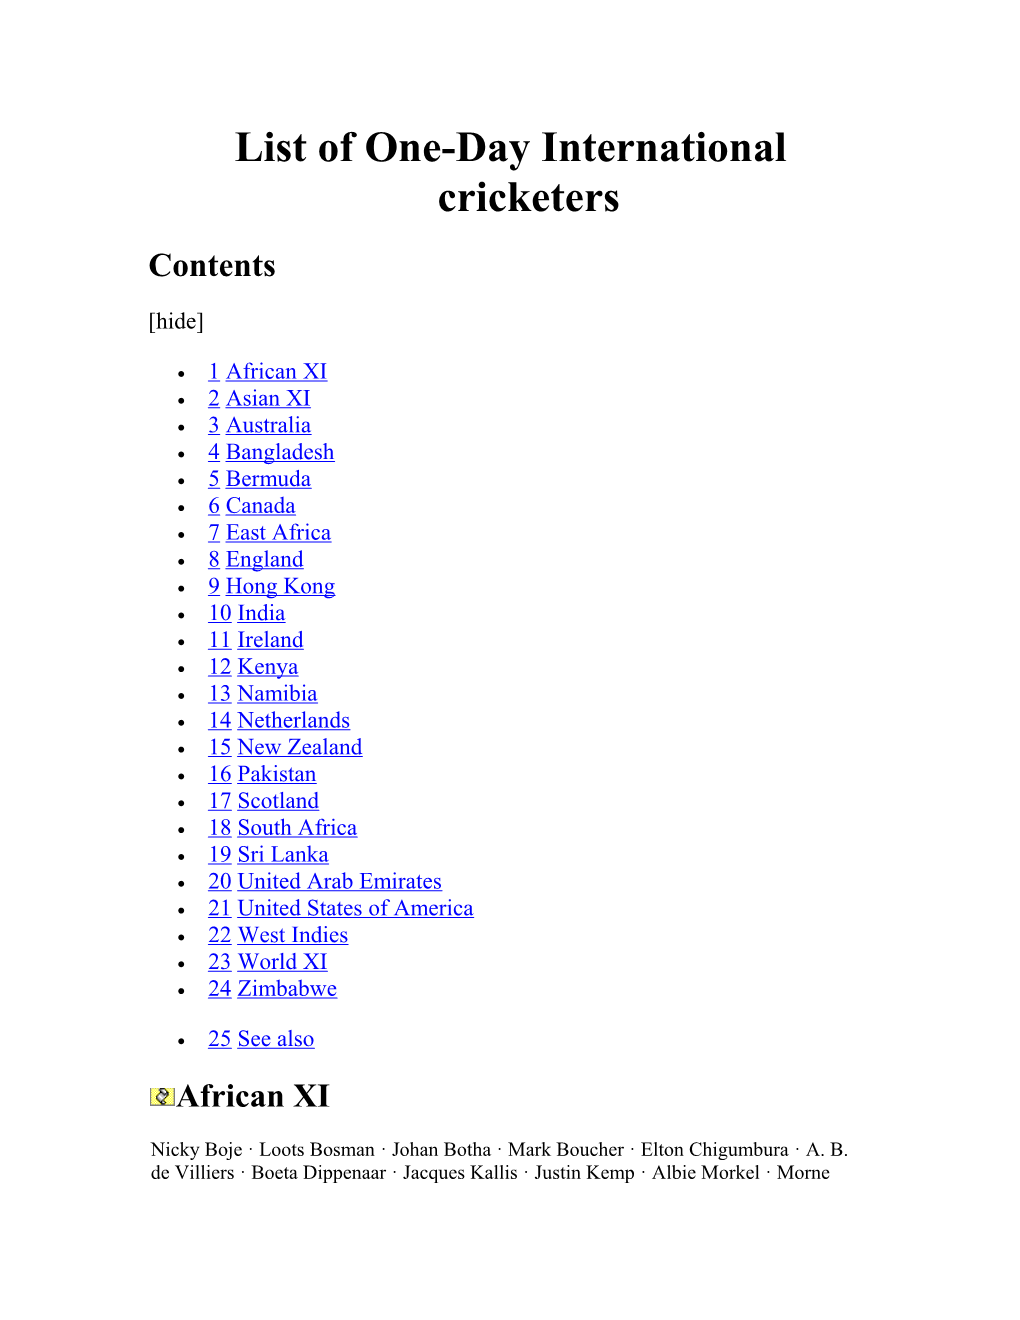 List of One-Day International Cricketers